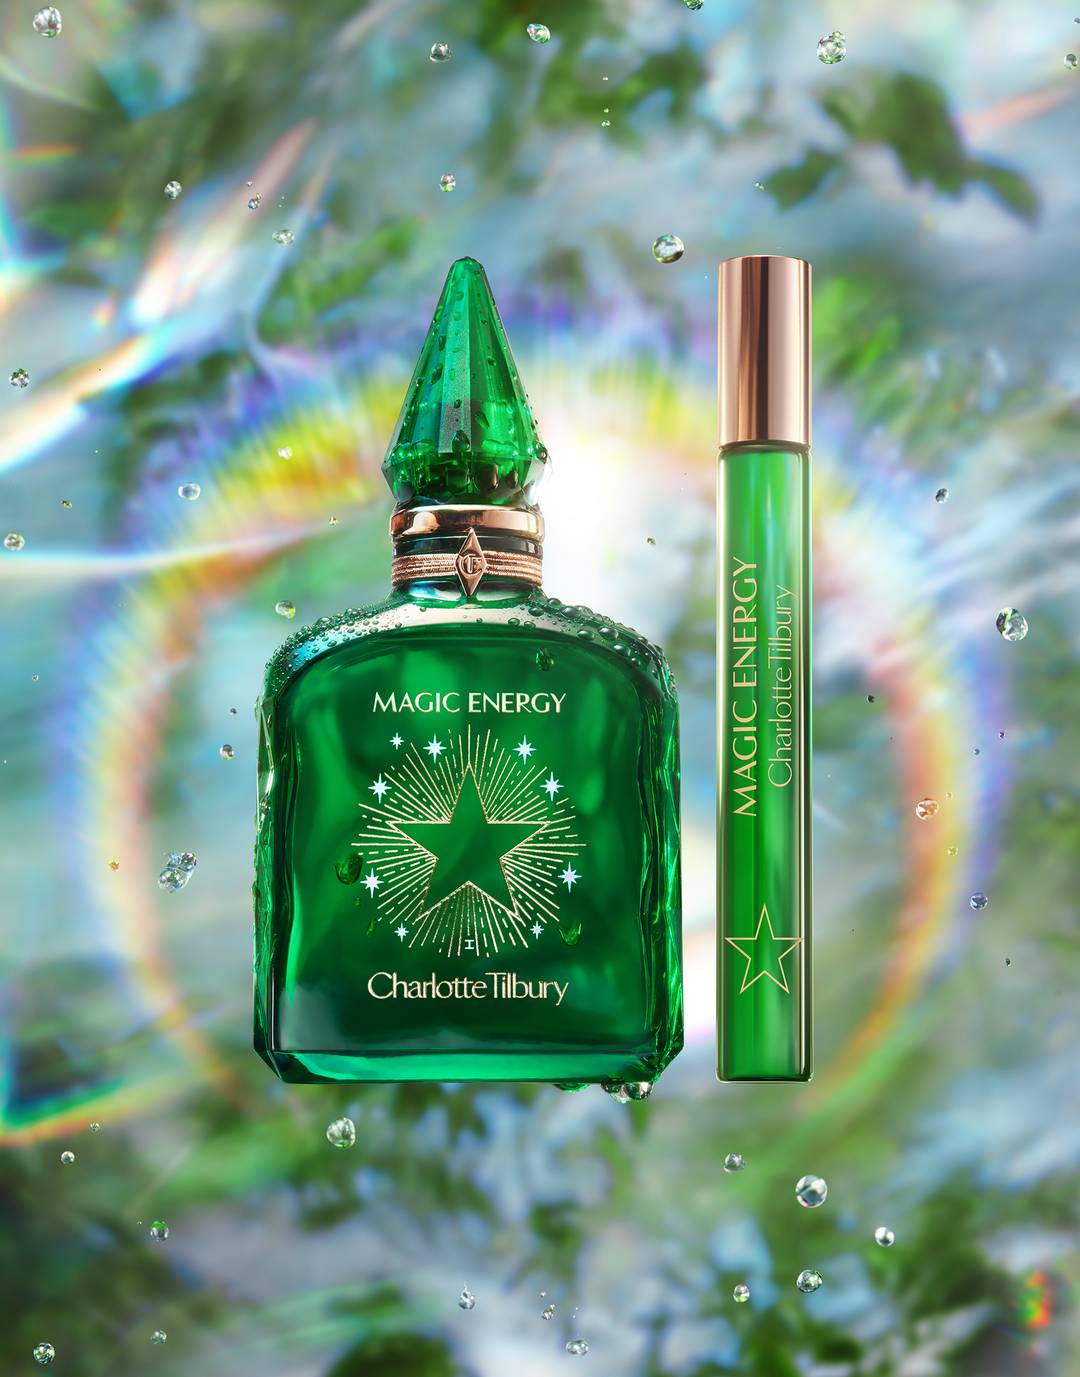 Charlotte Tilbury Fragrance Collection of Emotions - Magic Energy